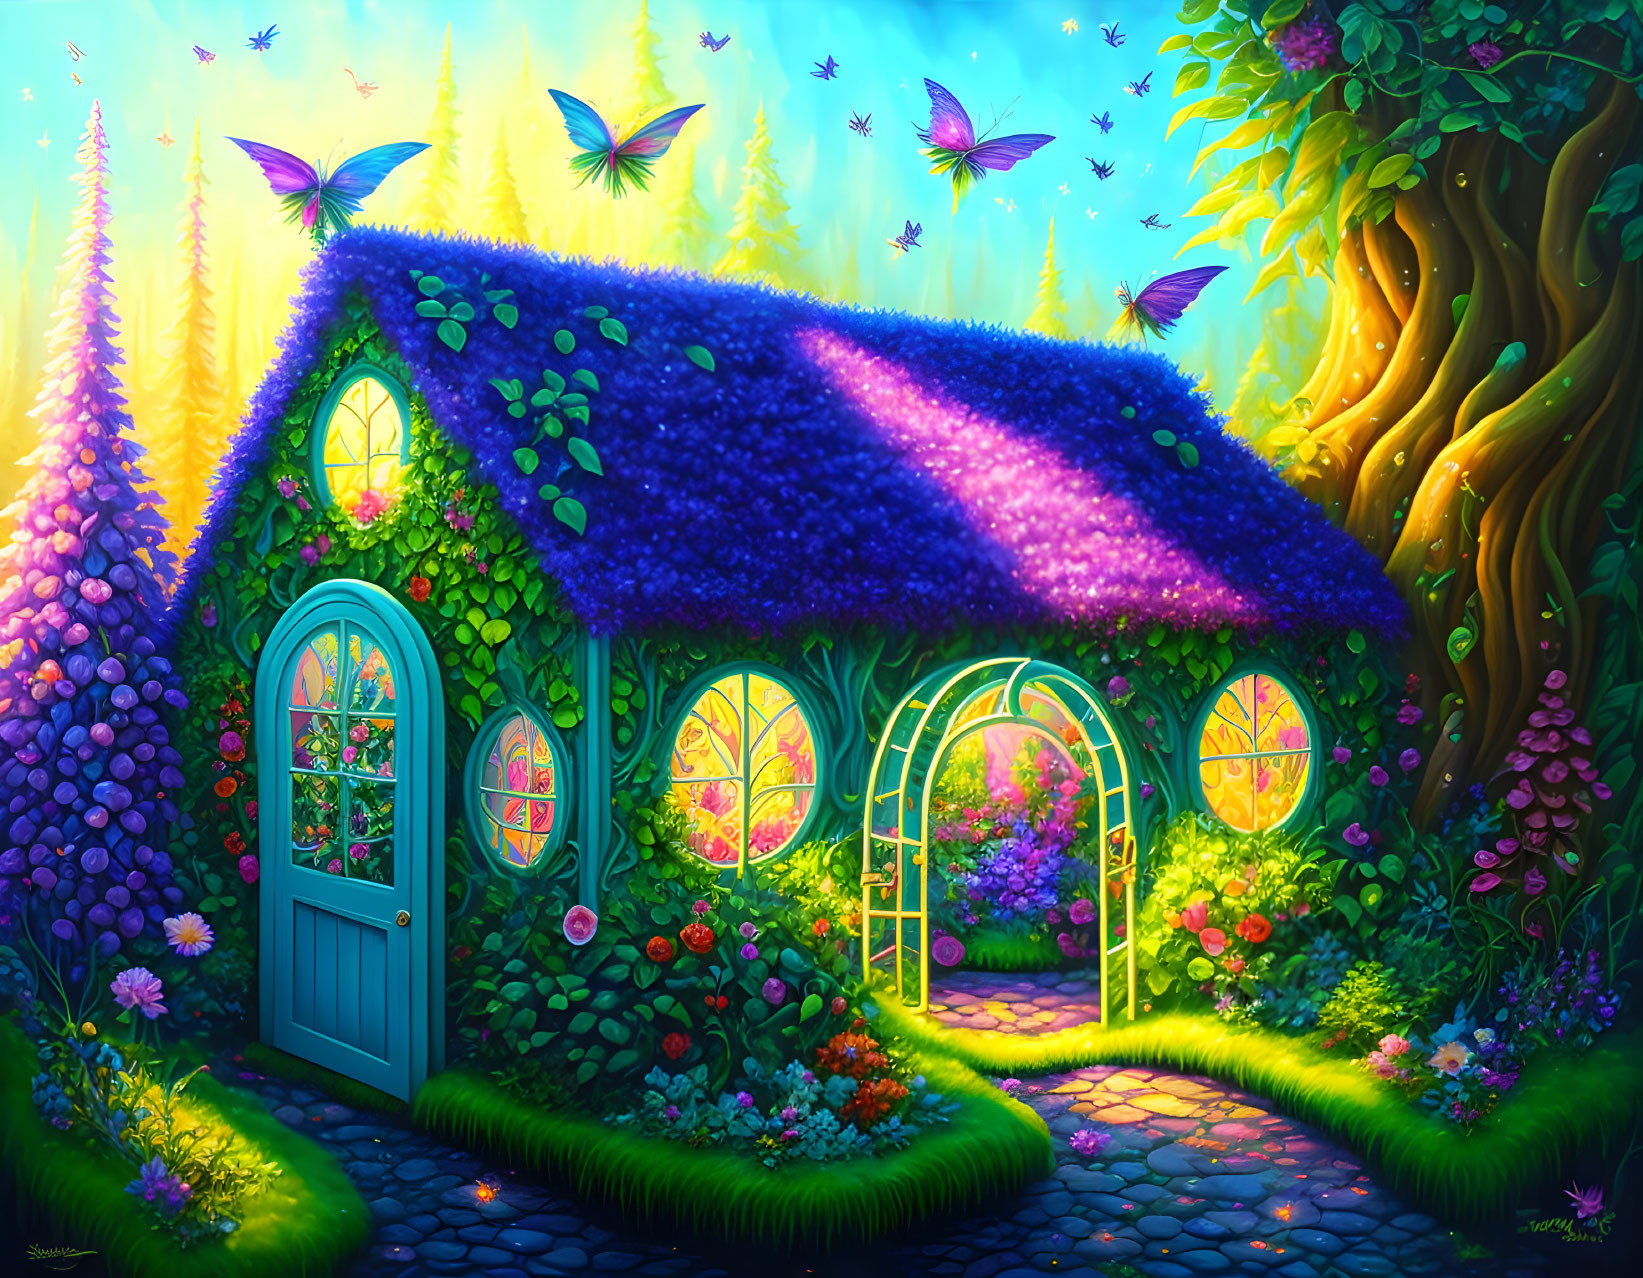 Fantasy illustration of a cozy cottage in magical forest with butterflies